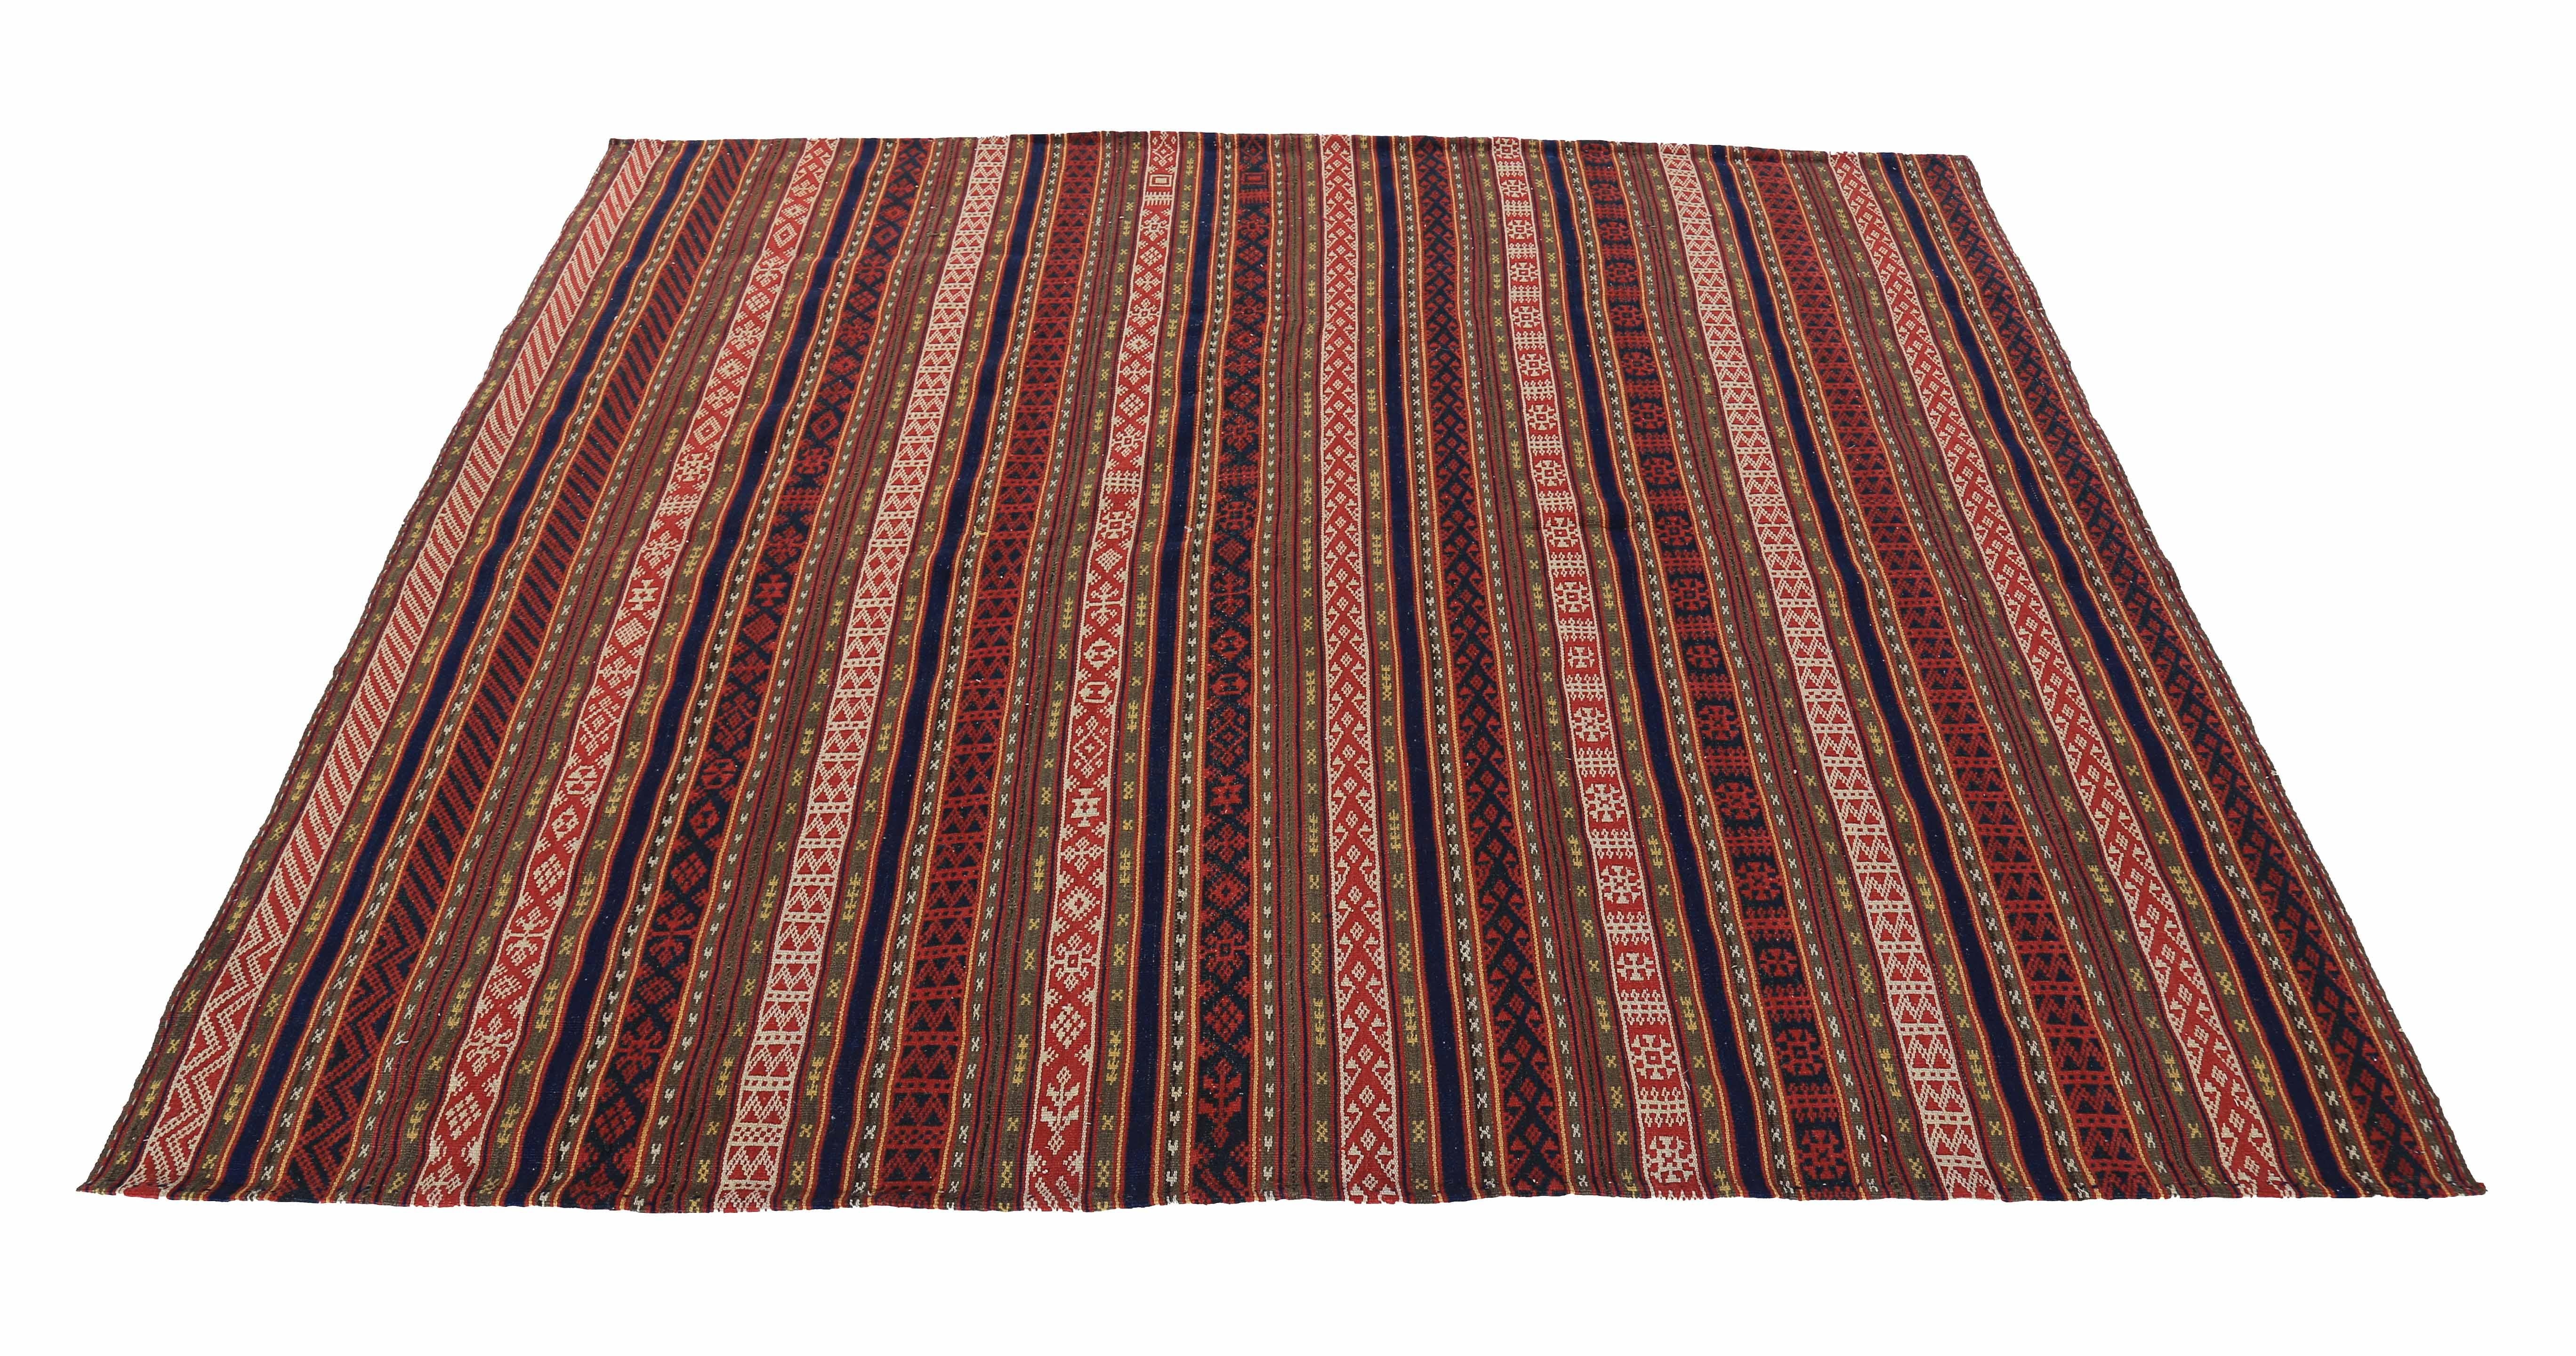 Modern Turkish rug handwoven from the finest sheep’s wool and colored with all-natural vegetable dyes that are safe for humans and pets. It’s a traditional Kilim flat-weave design featuring red and white tribal details on a striped field. It’s a